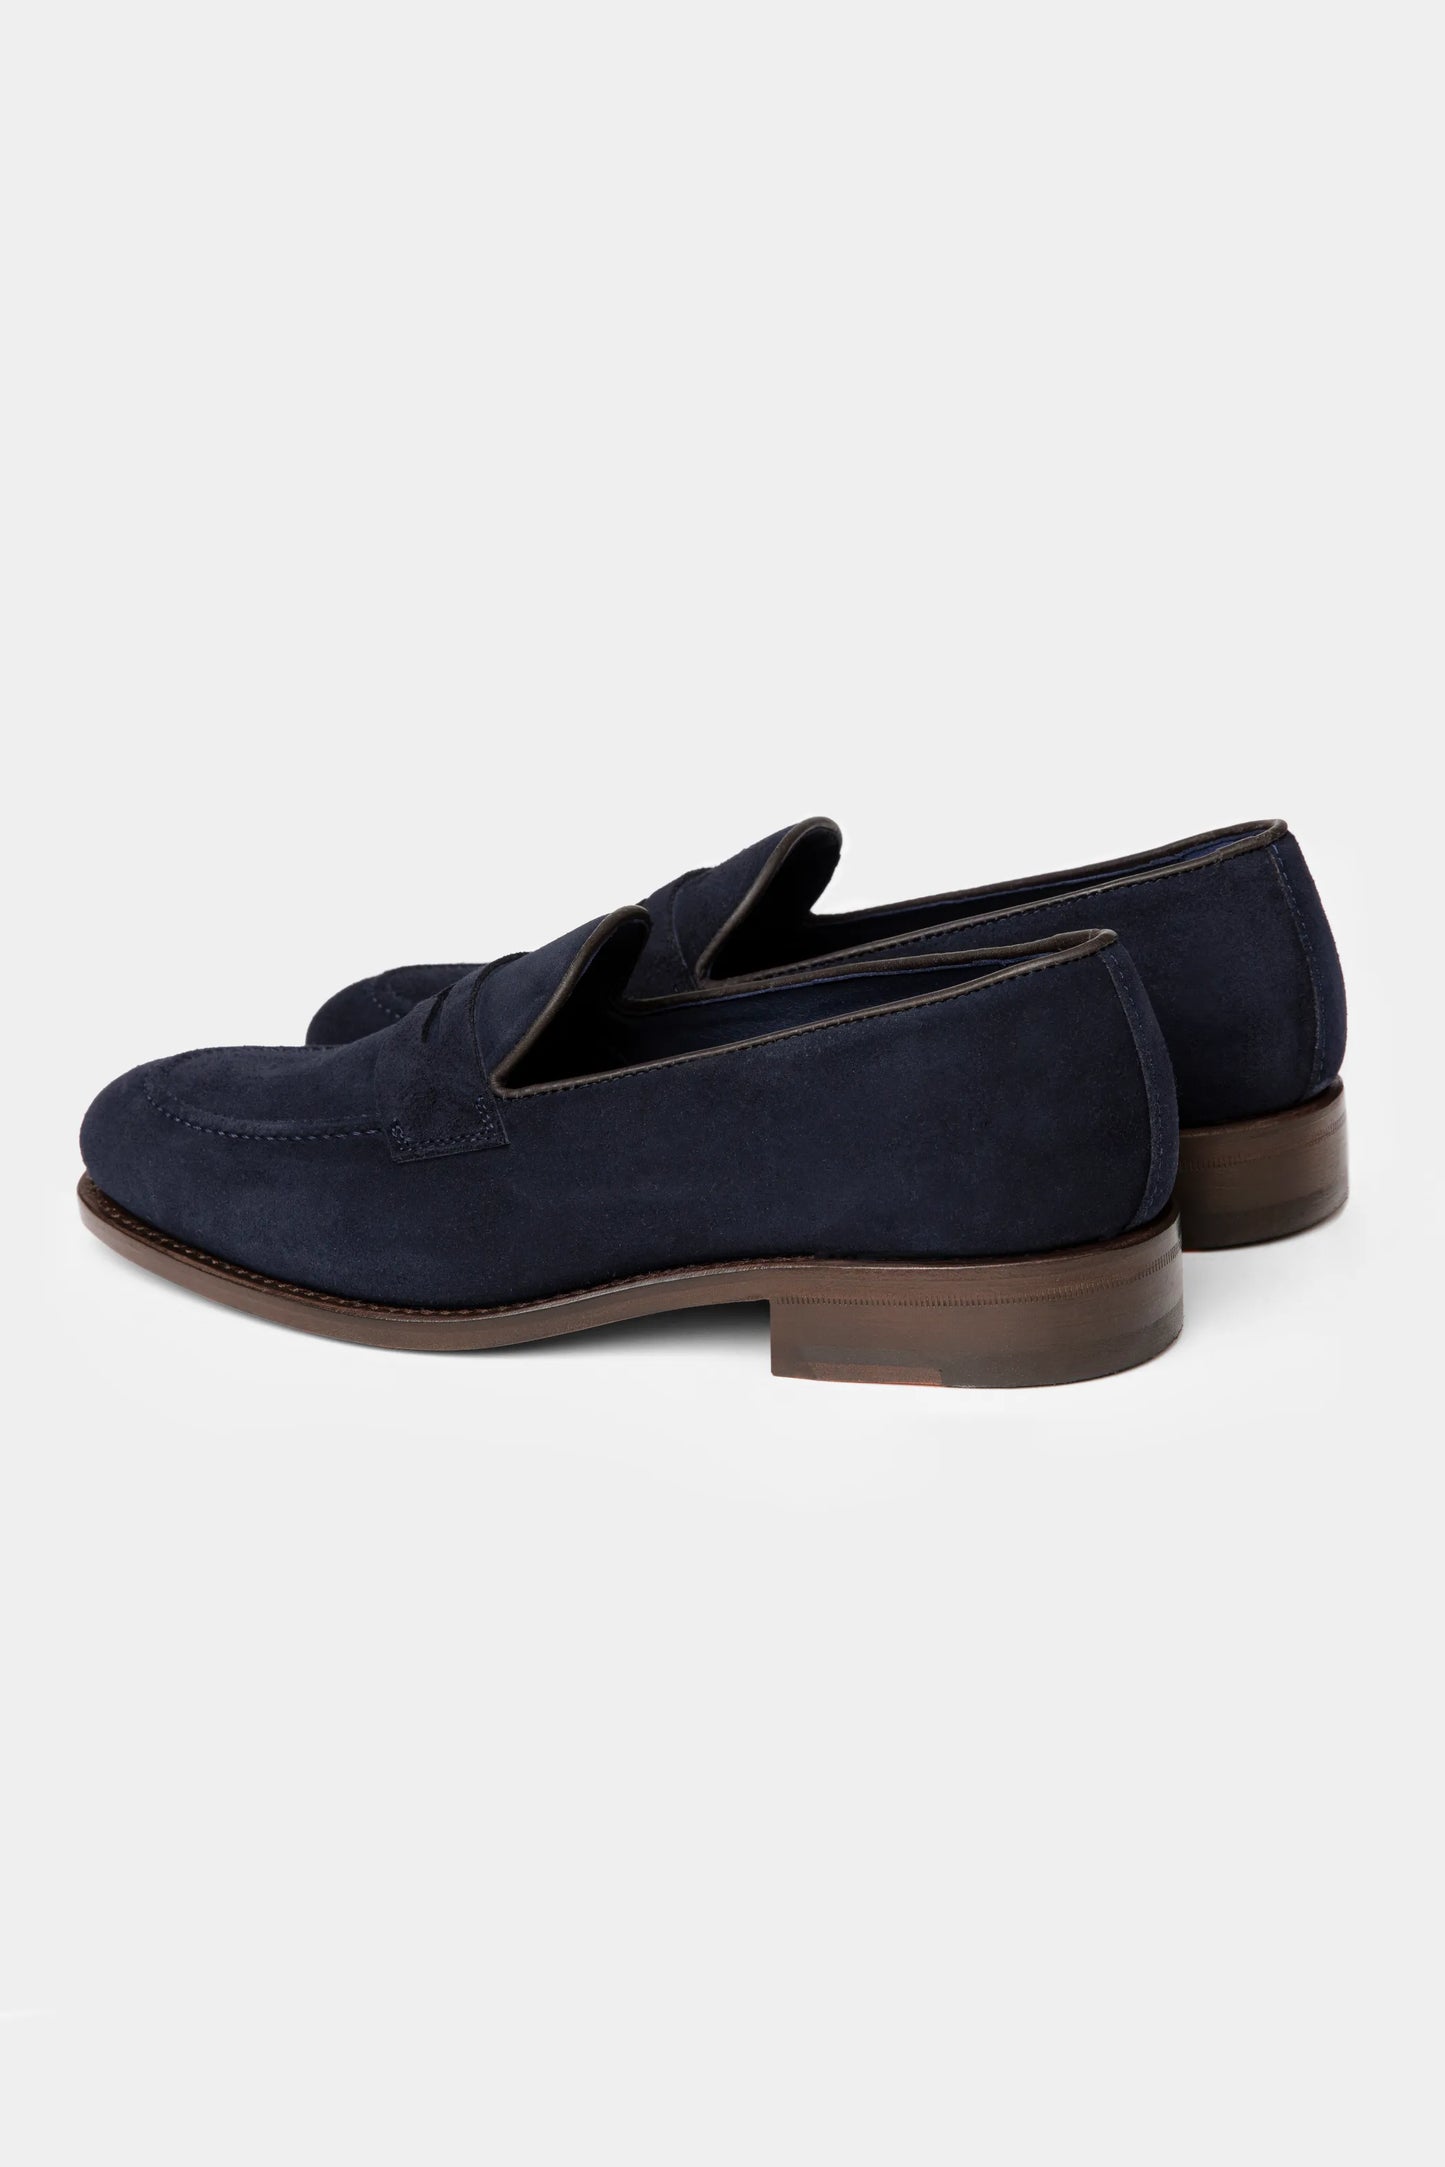 Navy Suede Penny Loafer